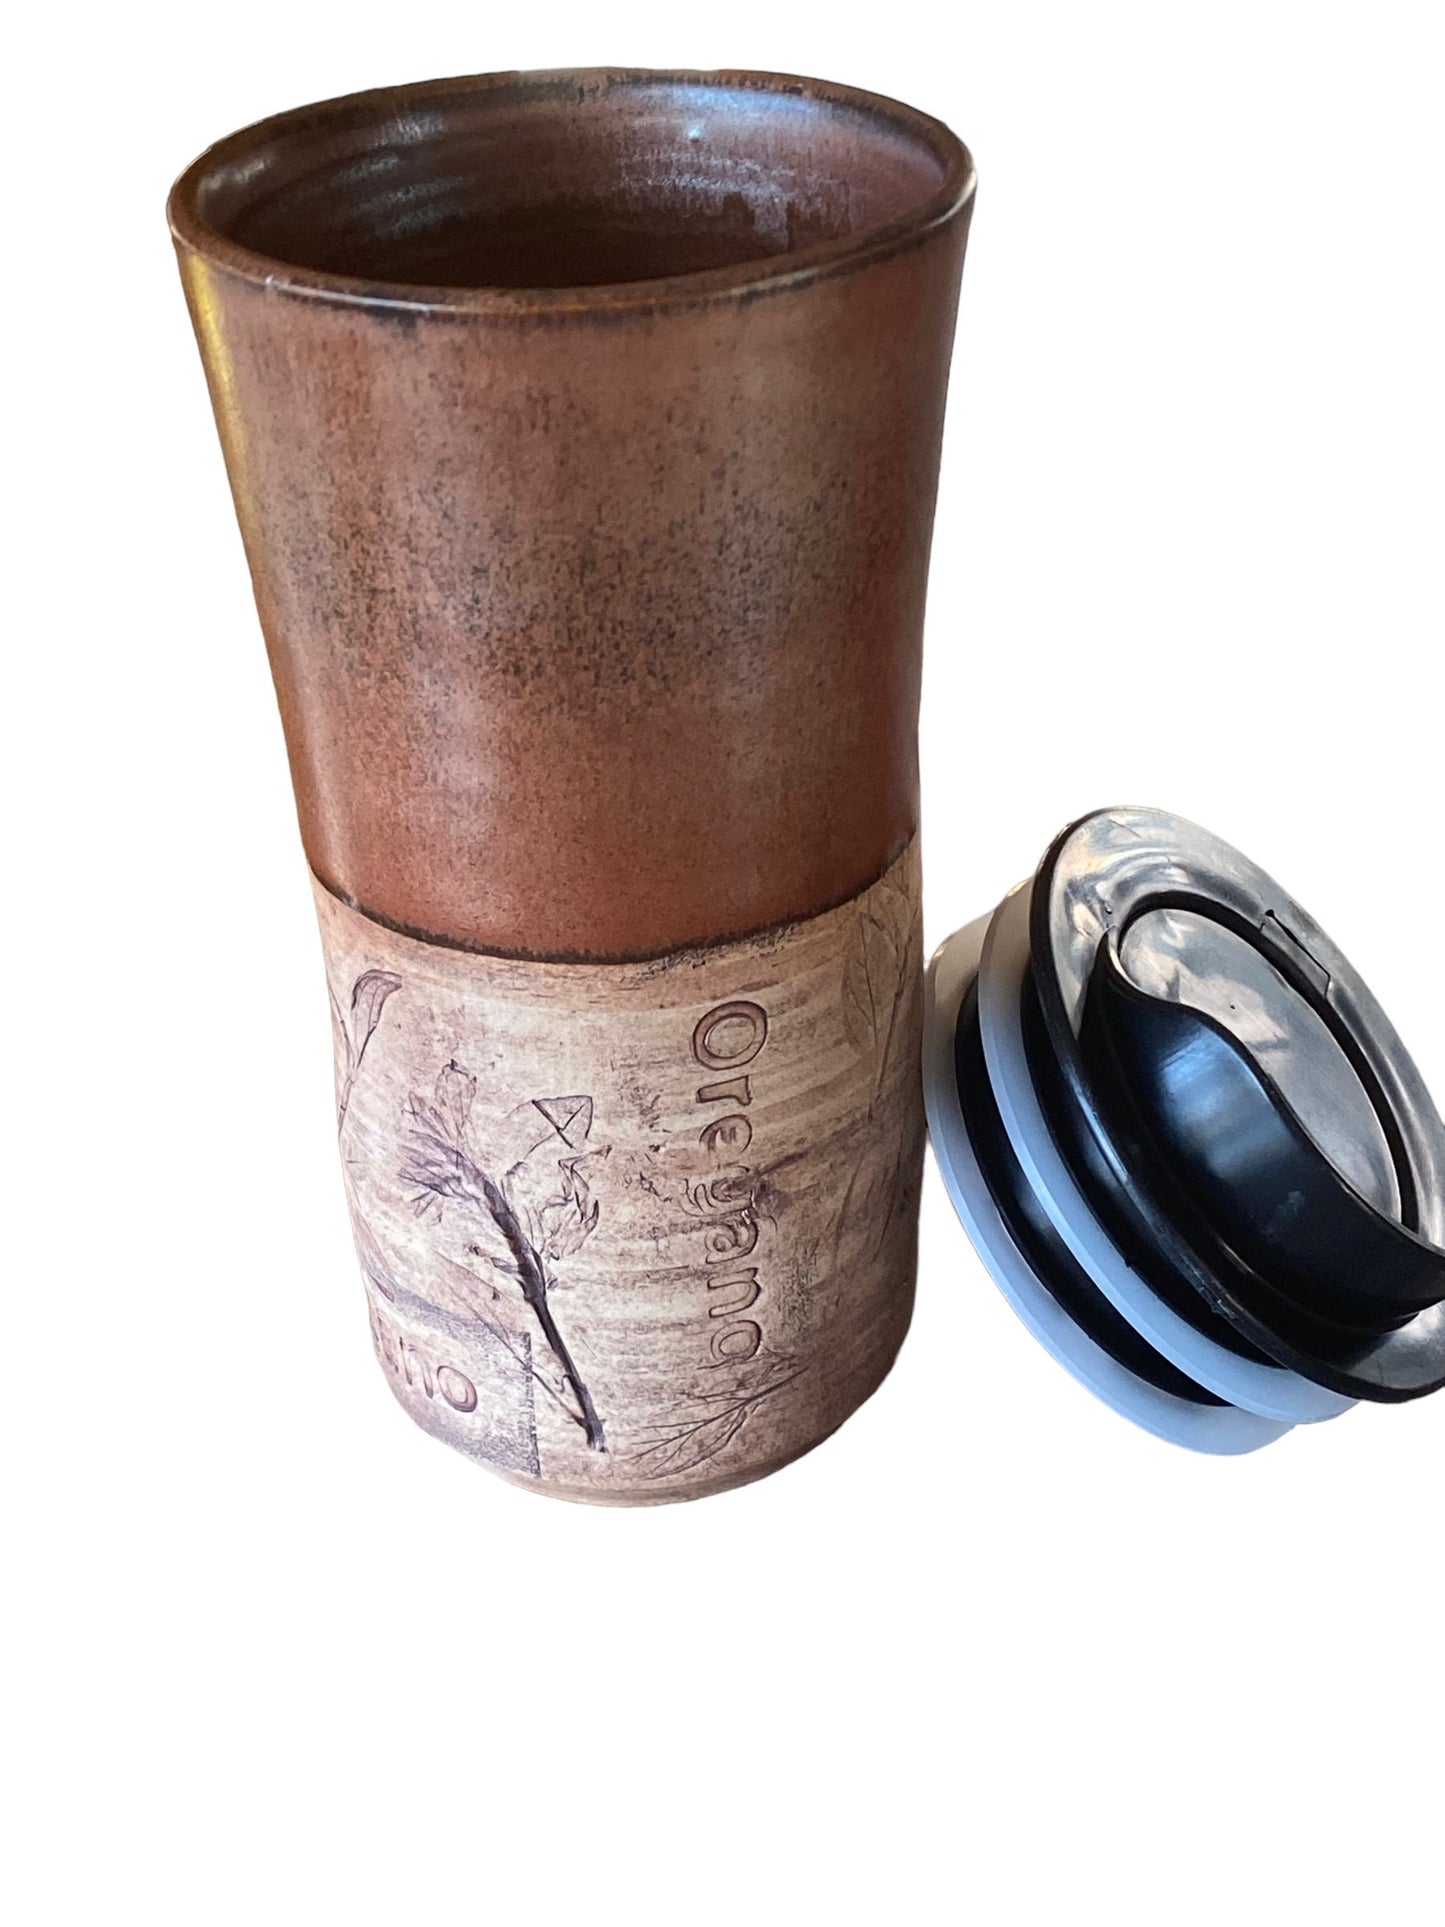 Herb-Themed Handmade Pottery Travel Mug with Locking Lid - Ceramic To-Go Coffee Cup for Secure and Natural Enjoyment on the Move